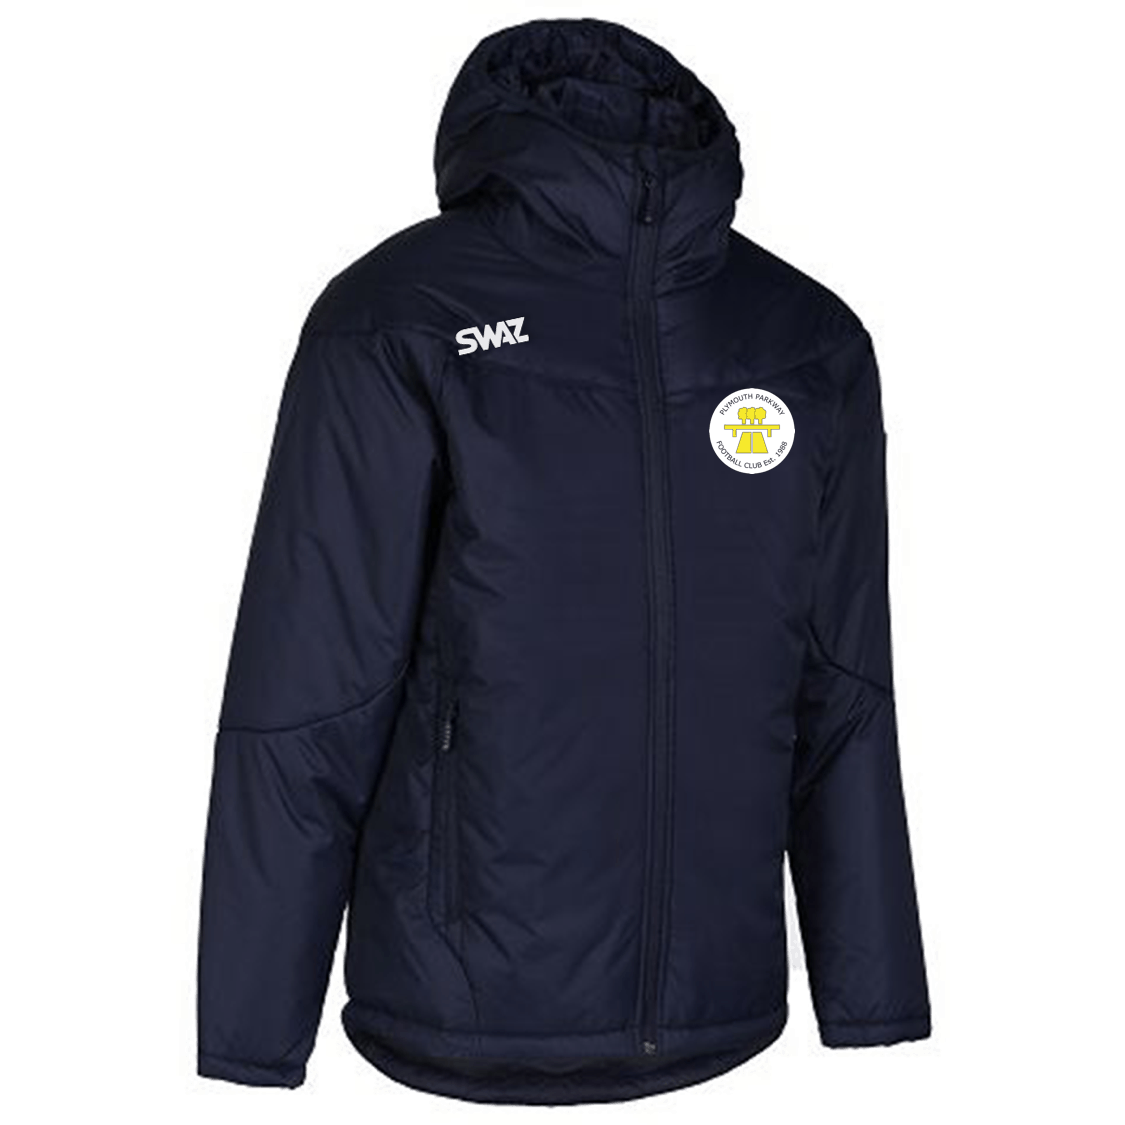 Plymouth Parkway Manager's Jacket | SWAZ Teamwear